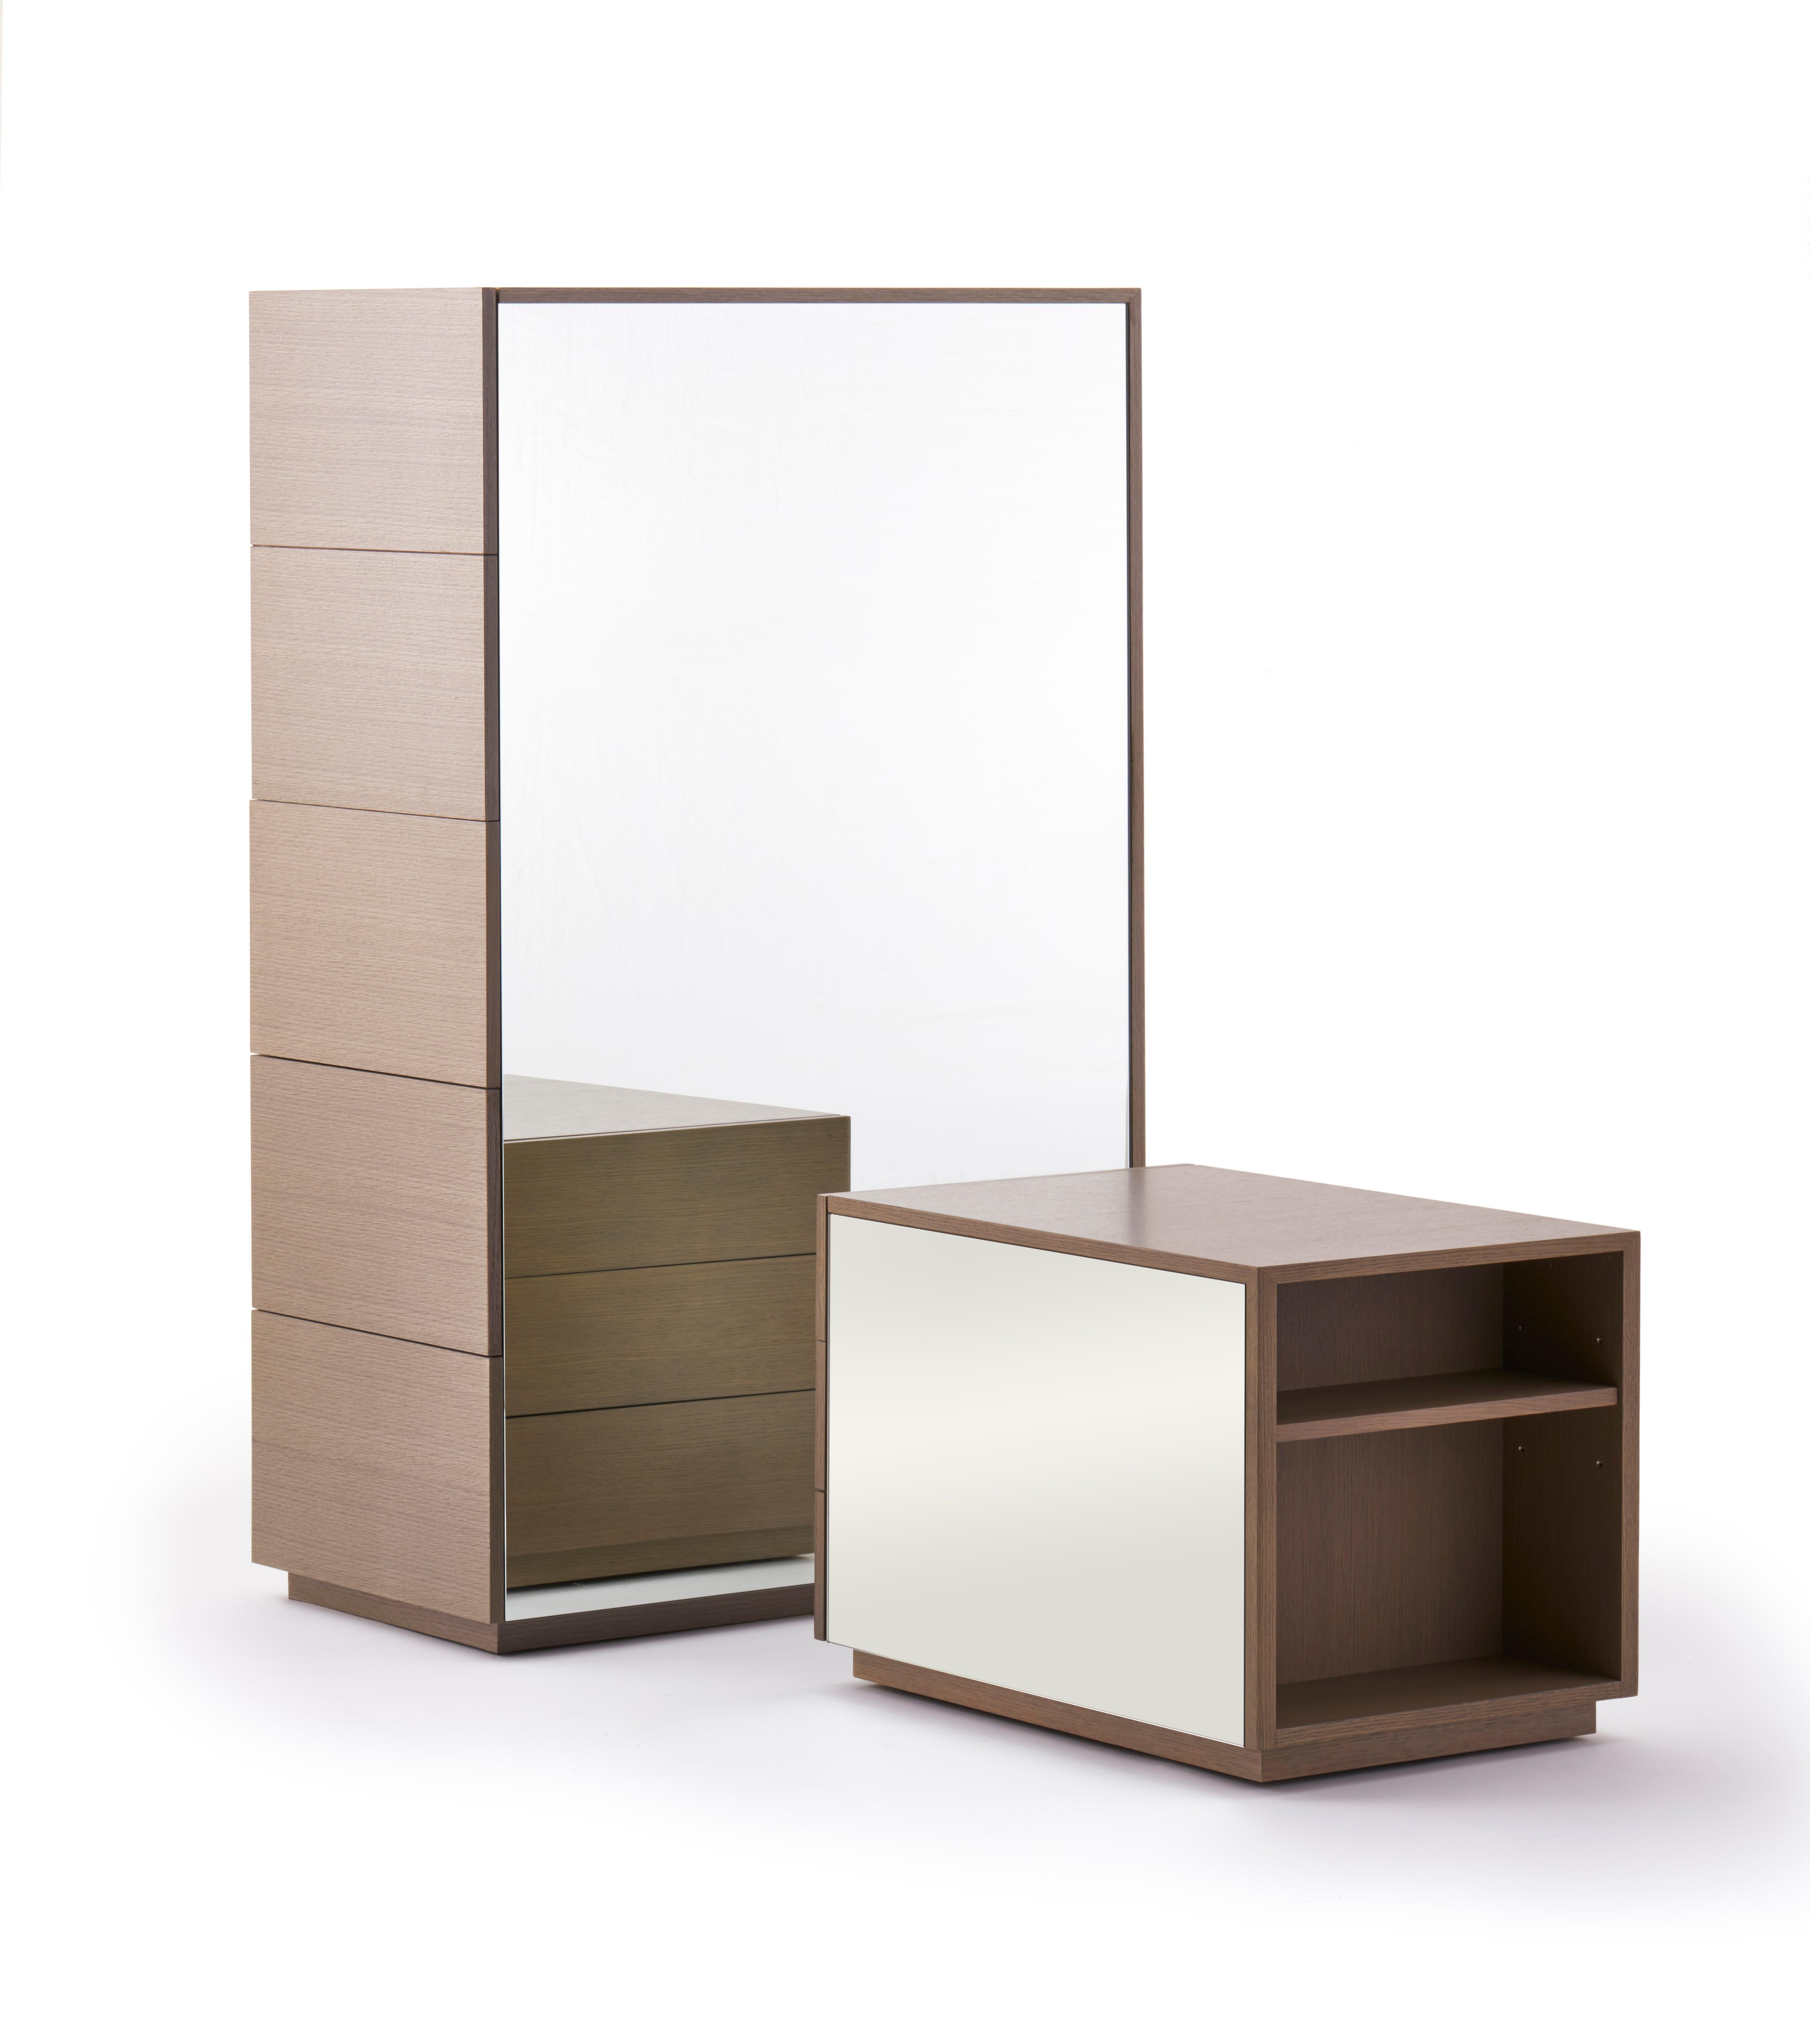 No. CG-001

The Mirrored Cabinet packs a lot of functions into one unit. Available with drawers or shelves accessible from the sides, it has a mirrored front and bacl, reflecting light and movement in the space. 

Its mirrored surfaces comes alive